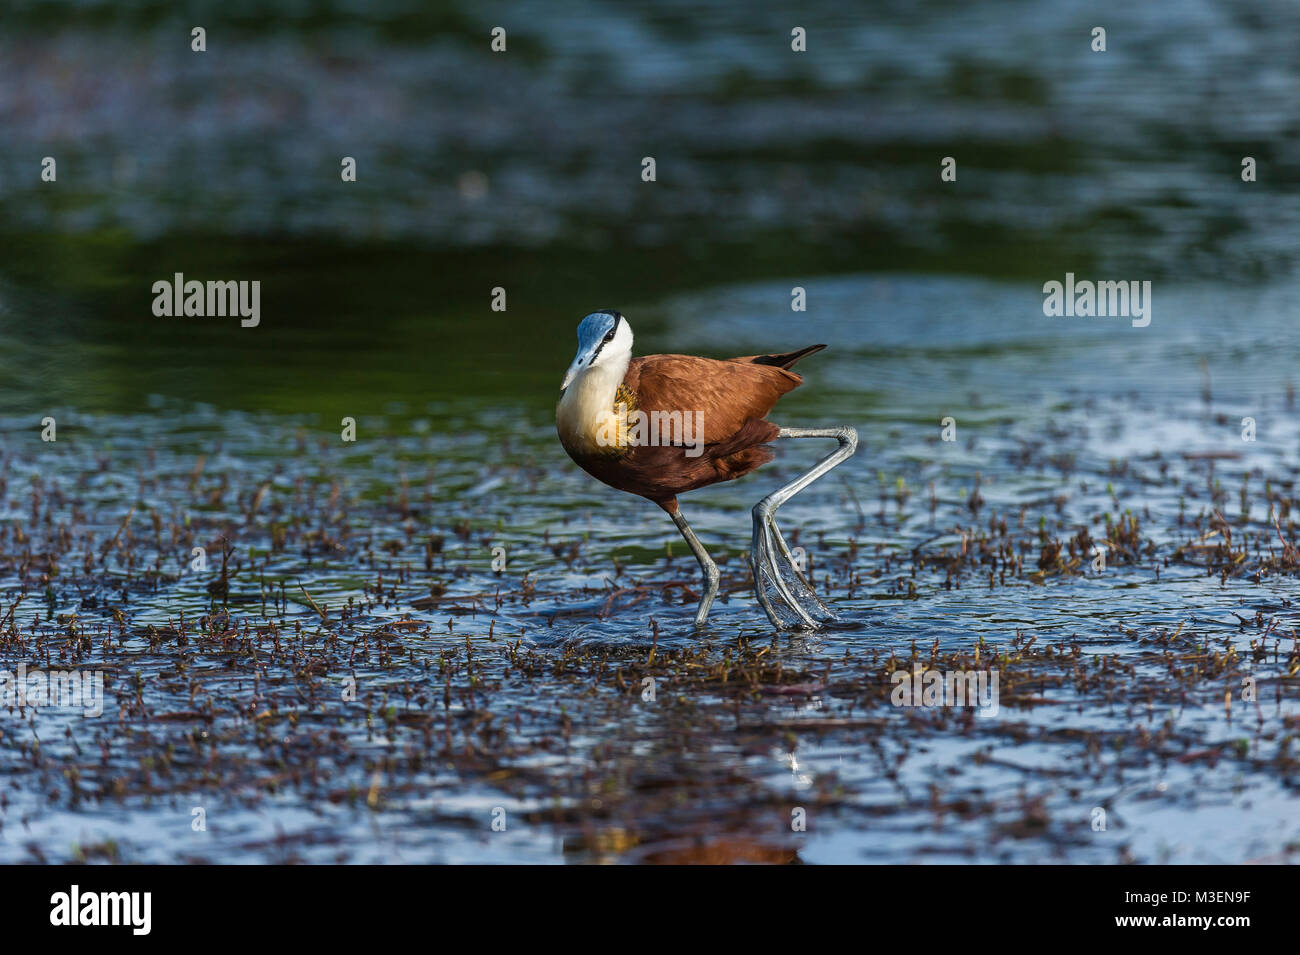 An African jacana (Actophilornis africanus) showing its long, extended toes used for distributing its weight while walking across floating lily pads. Stock Photo